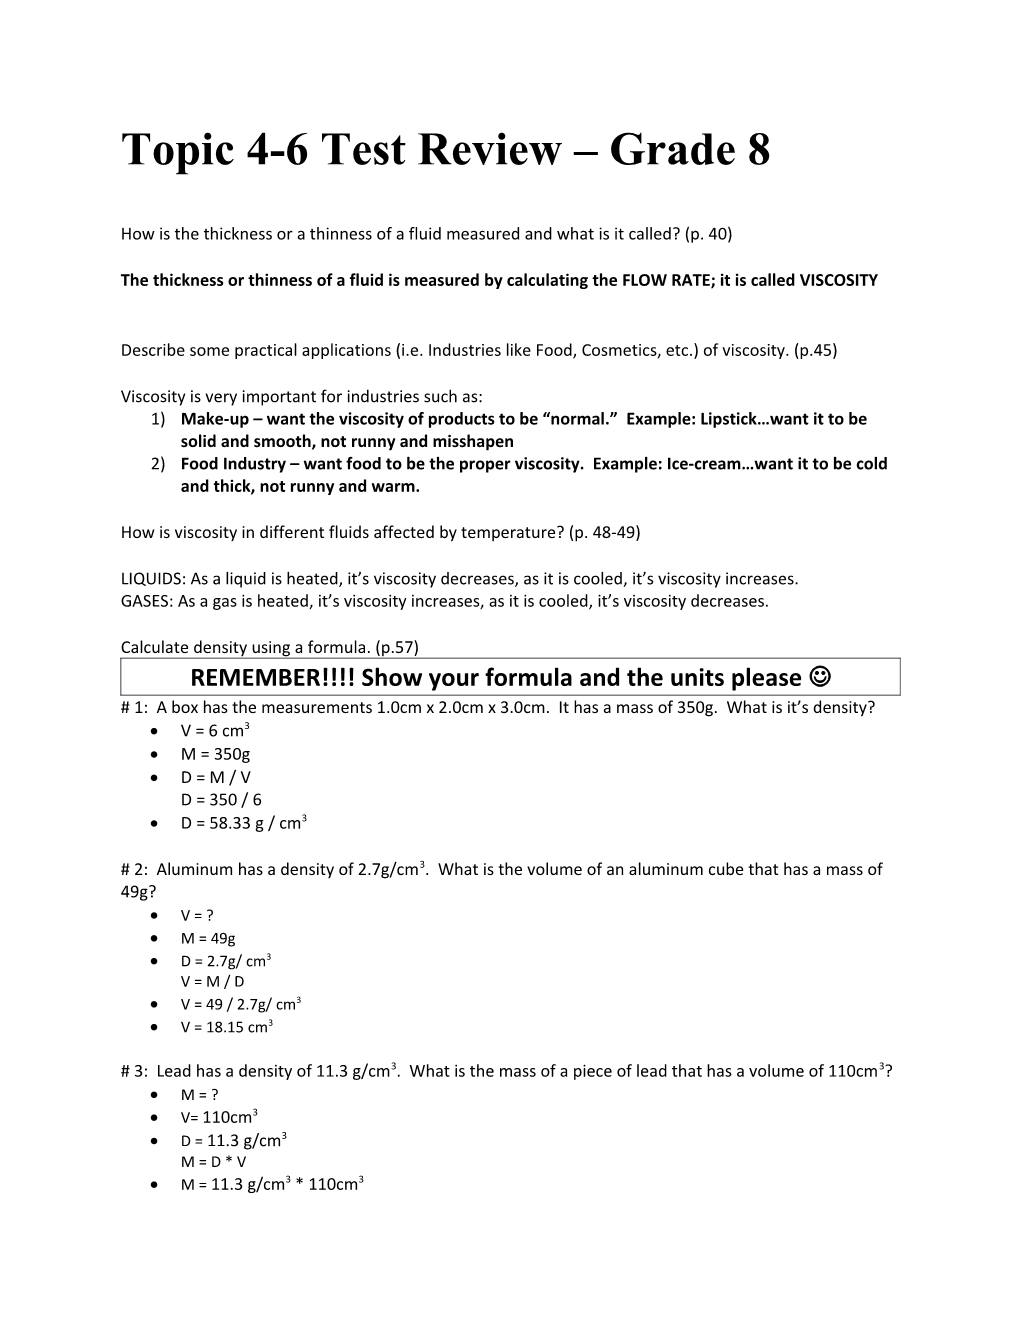 Topic 4-6 Test Review Grade 8